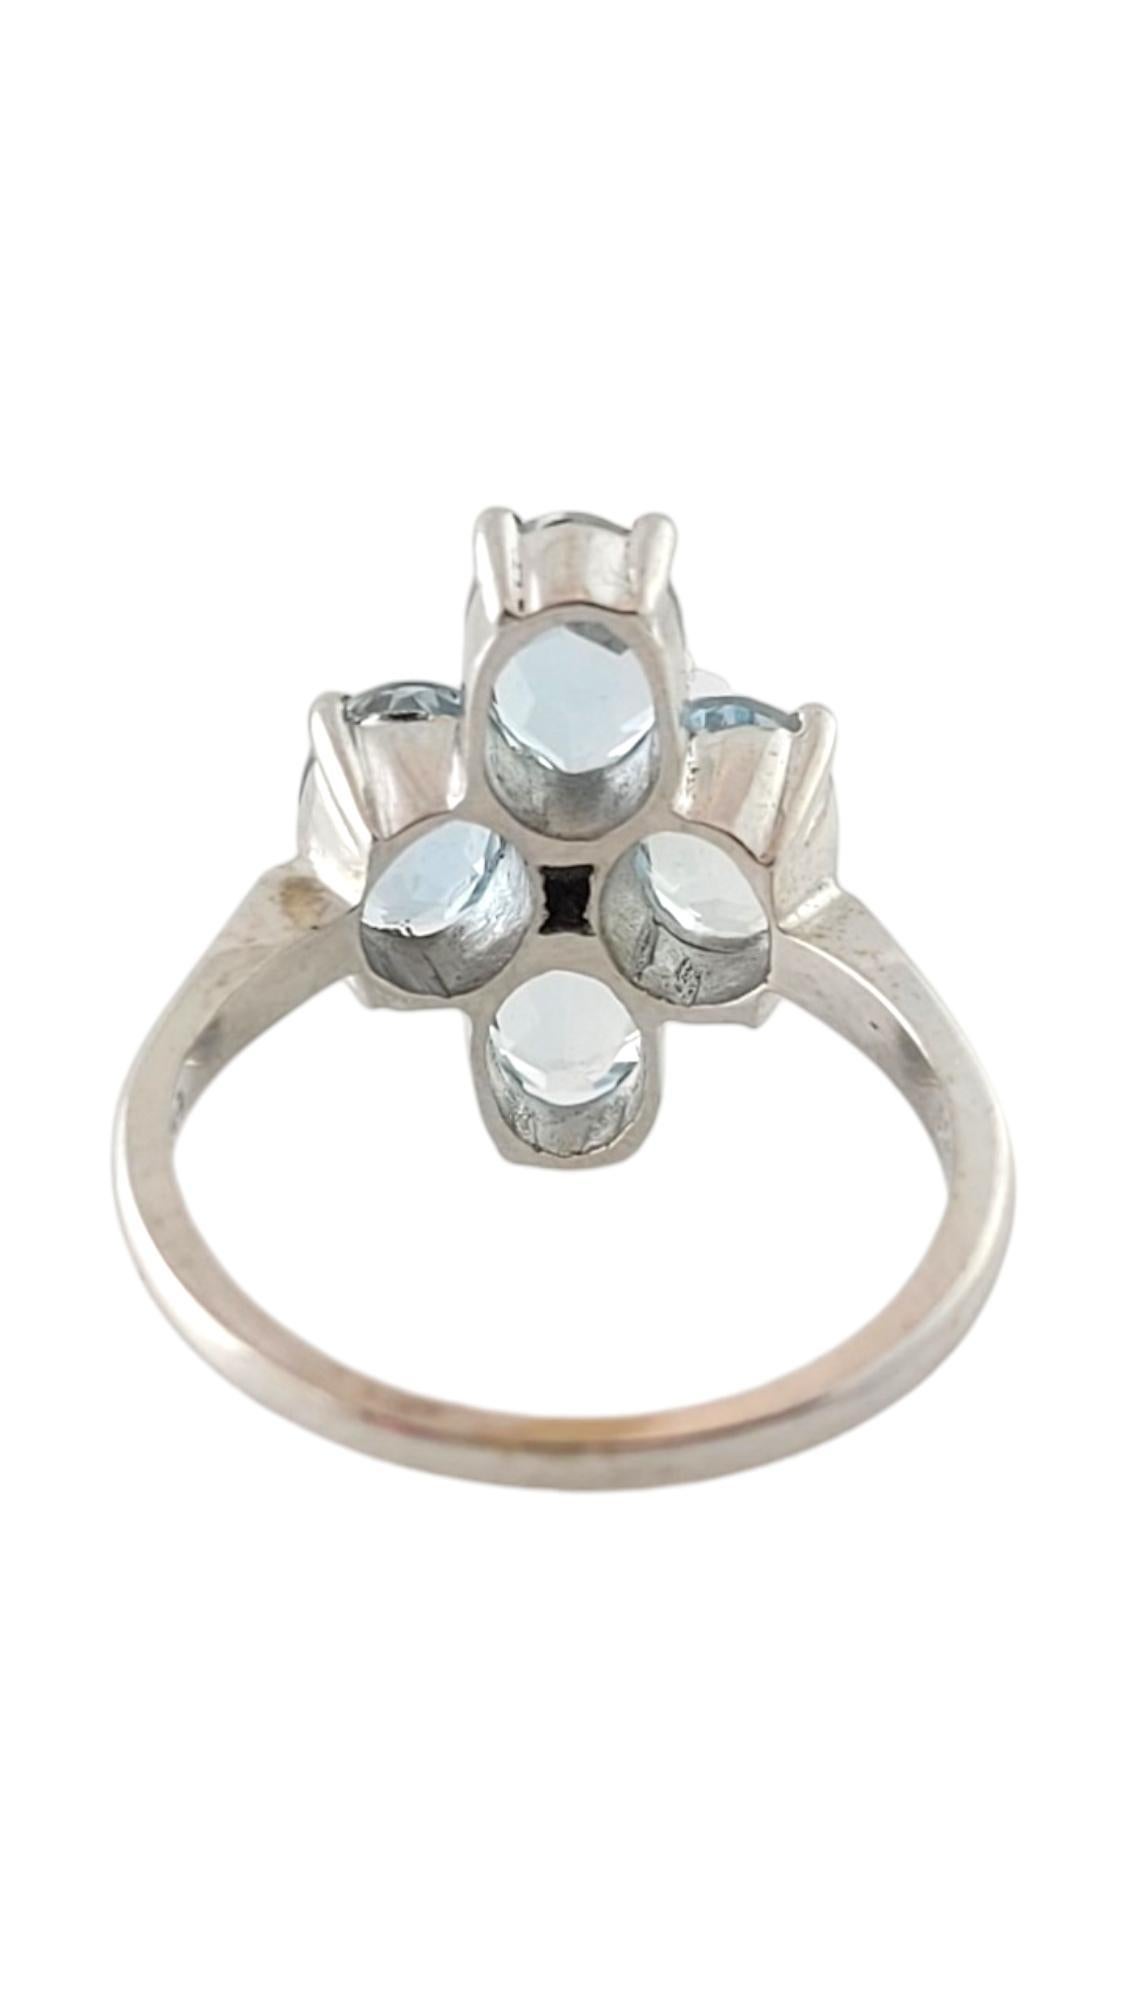 Oval Cut 14K White Gold Diamond & Aquamarine Clover Style Ring Size 6.5 #16938 For Sale